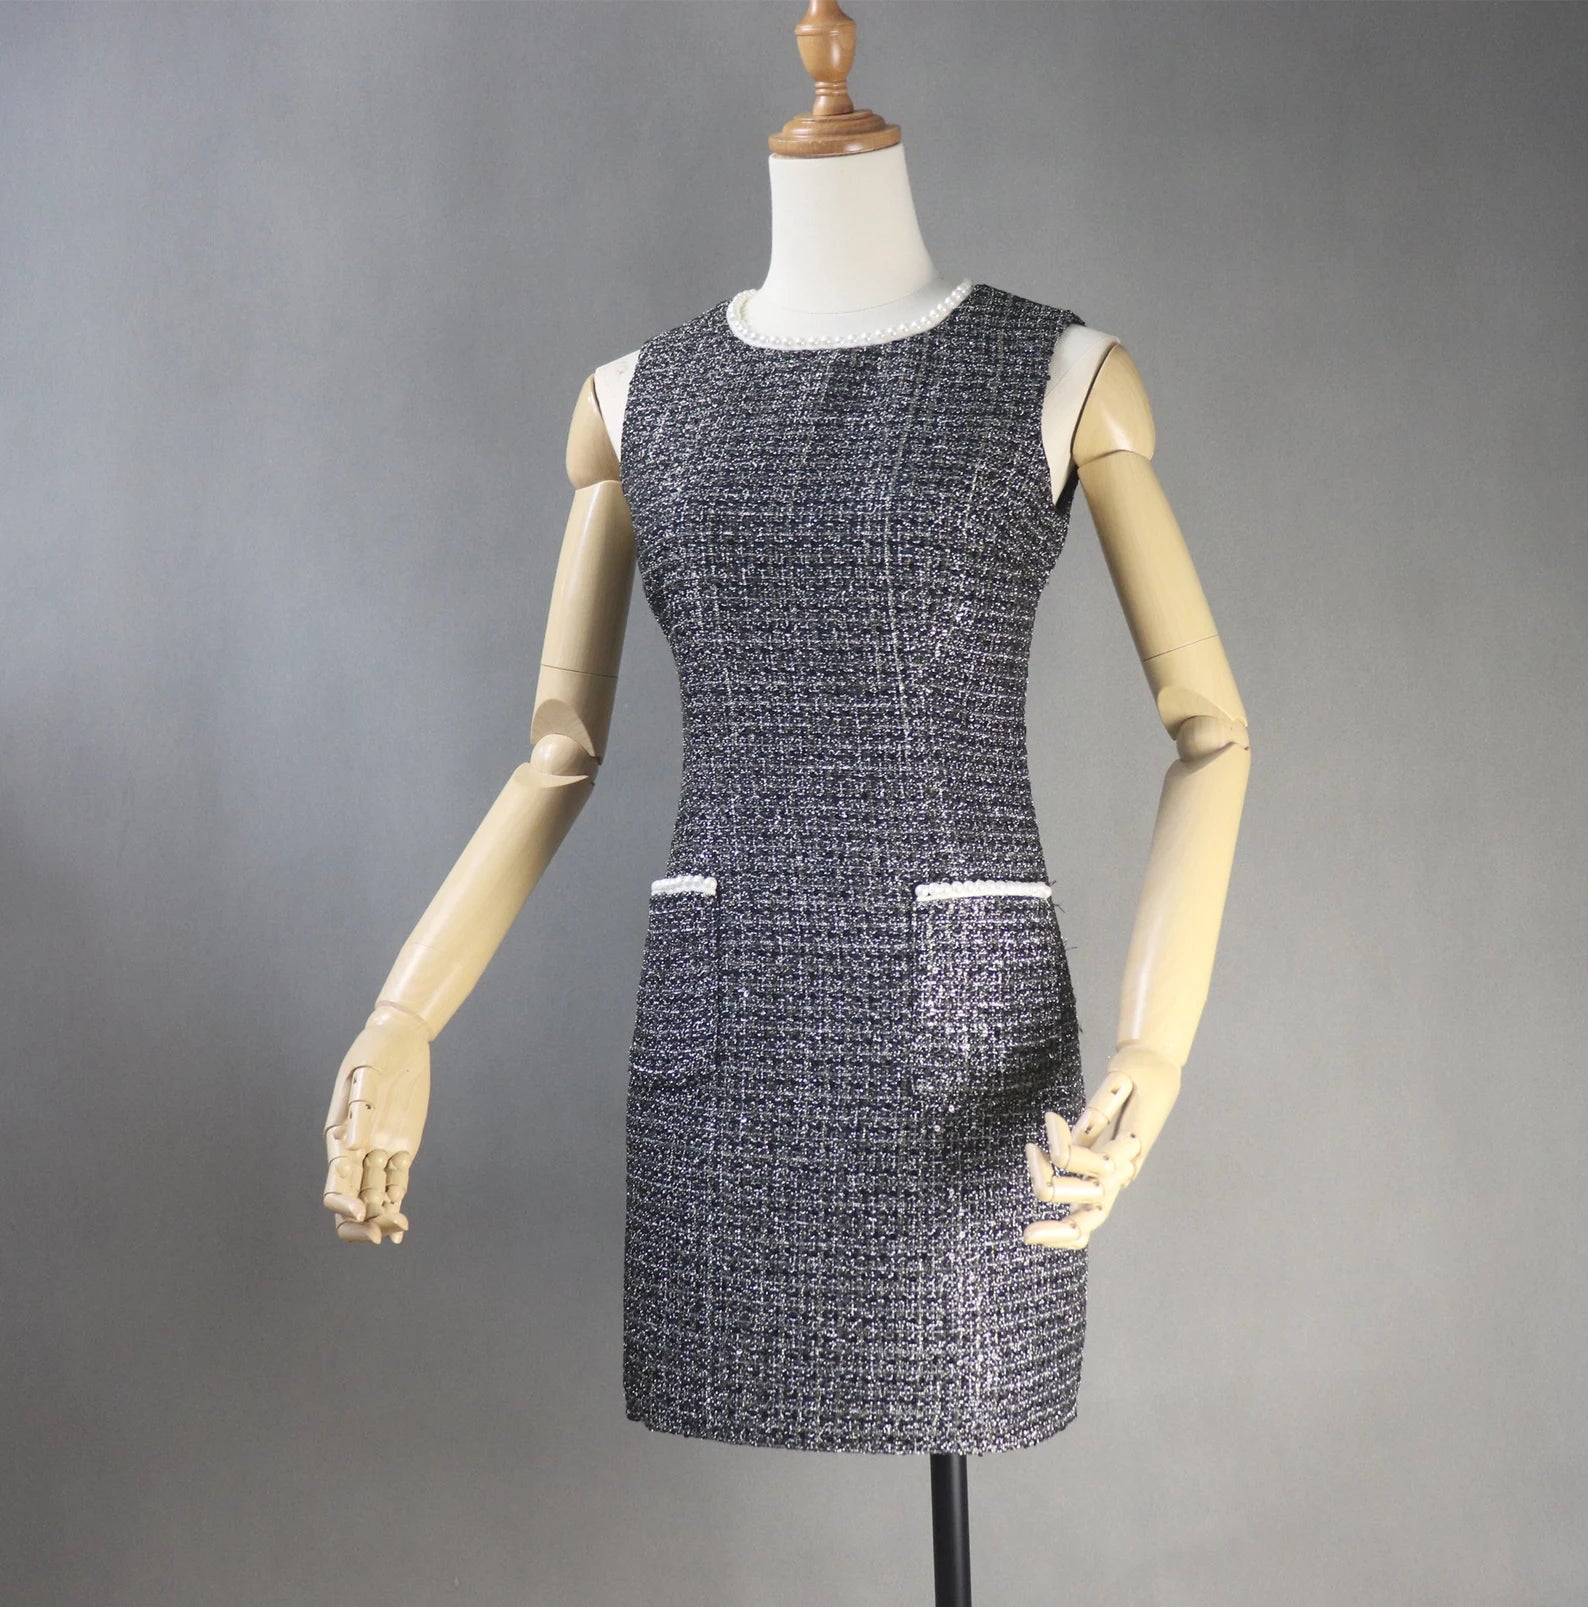 This dazzling FASHION Sequinned tweed little dress will stun everyone with its glamorous notes! This slim-fit black dress is made of a mid-weight tweed with dazzling lame accents, small sequins with white chiffon trims, and is lined with black satin. This dress also has a high neckline with trims, a sleeveless design,